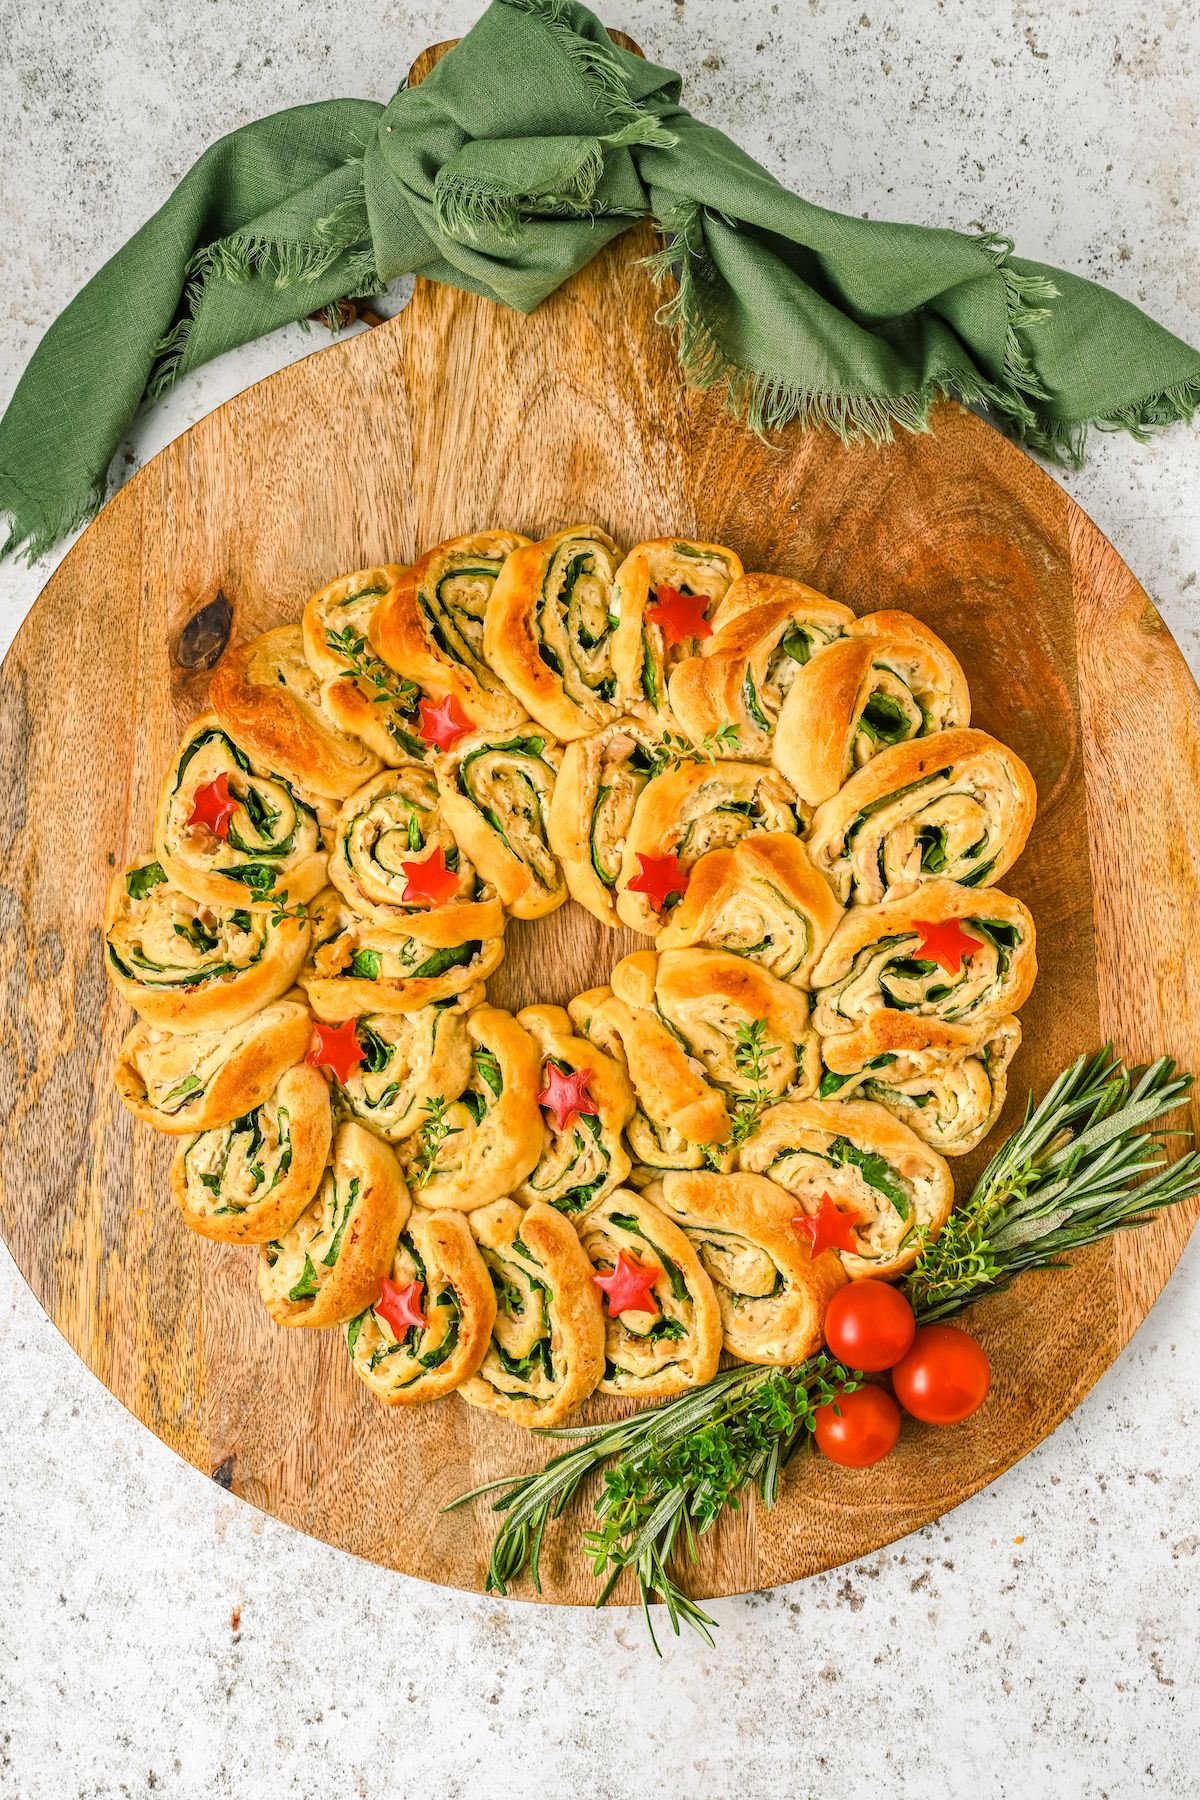 A crescent wreath garnished with tomatoes, rosemary, and stars cut out of bell pepper.